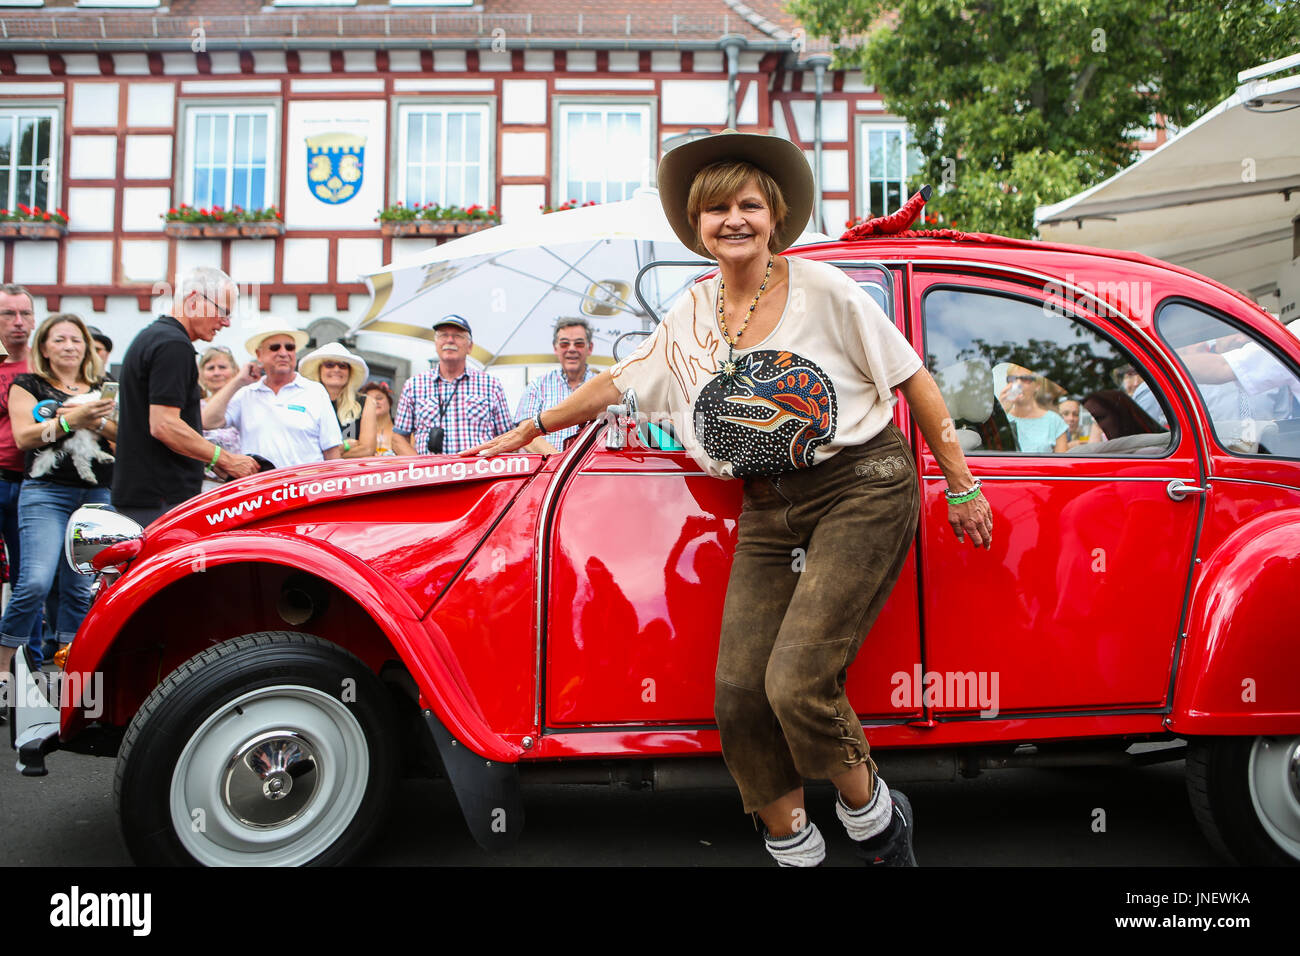 Wettenberg, Germany. 29th July, 2017. Frl. Menke meets a model of her first own car - a Citroën 2CV - at Golden Oldies Festival in Wettenberg, Germany. Frl. Menke (born November 4, 1960 as Franziska Menke in Hamburg, Germany) was a star of the Neue Deutsche Welle genre of German popular music in the early 1980s. The Golden Oldies Festival is a annual nostalgic festival (est. in 1989) with focus on 1950s to1970s, over 1000 exhibited classic cars and old-timers, over 50 live bands. - Credit: Christian Lademann Stock Photo